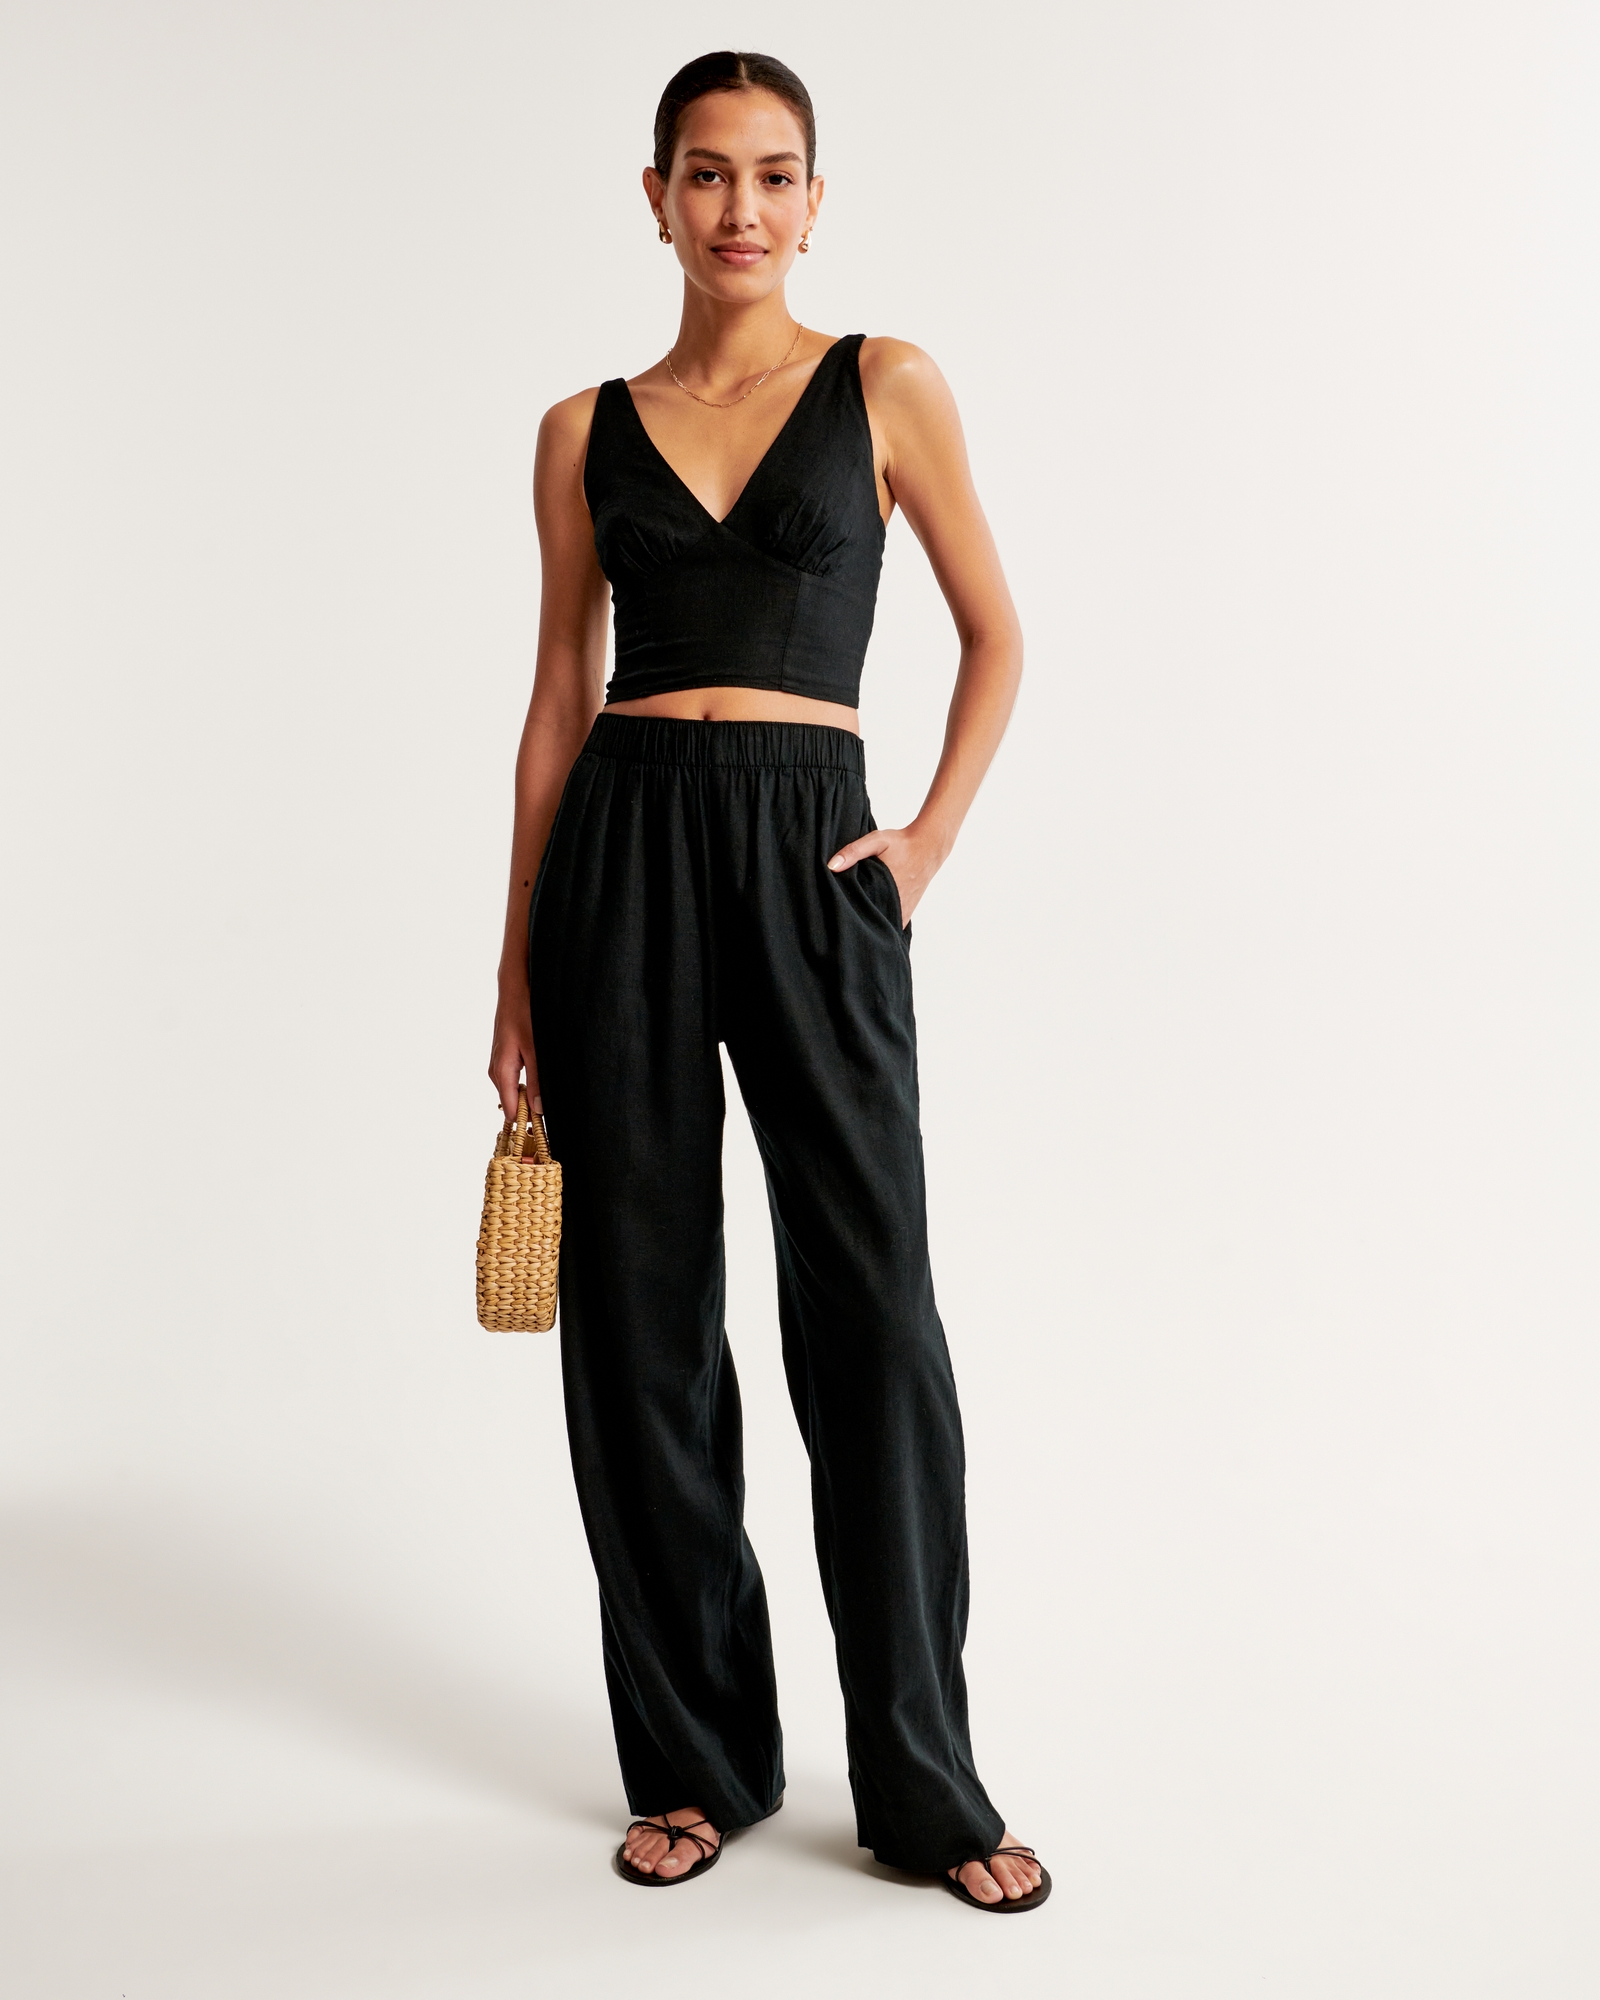 Relaxed Linen Pull On Pants - Black